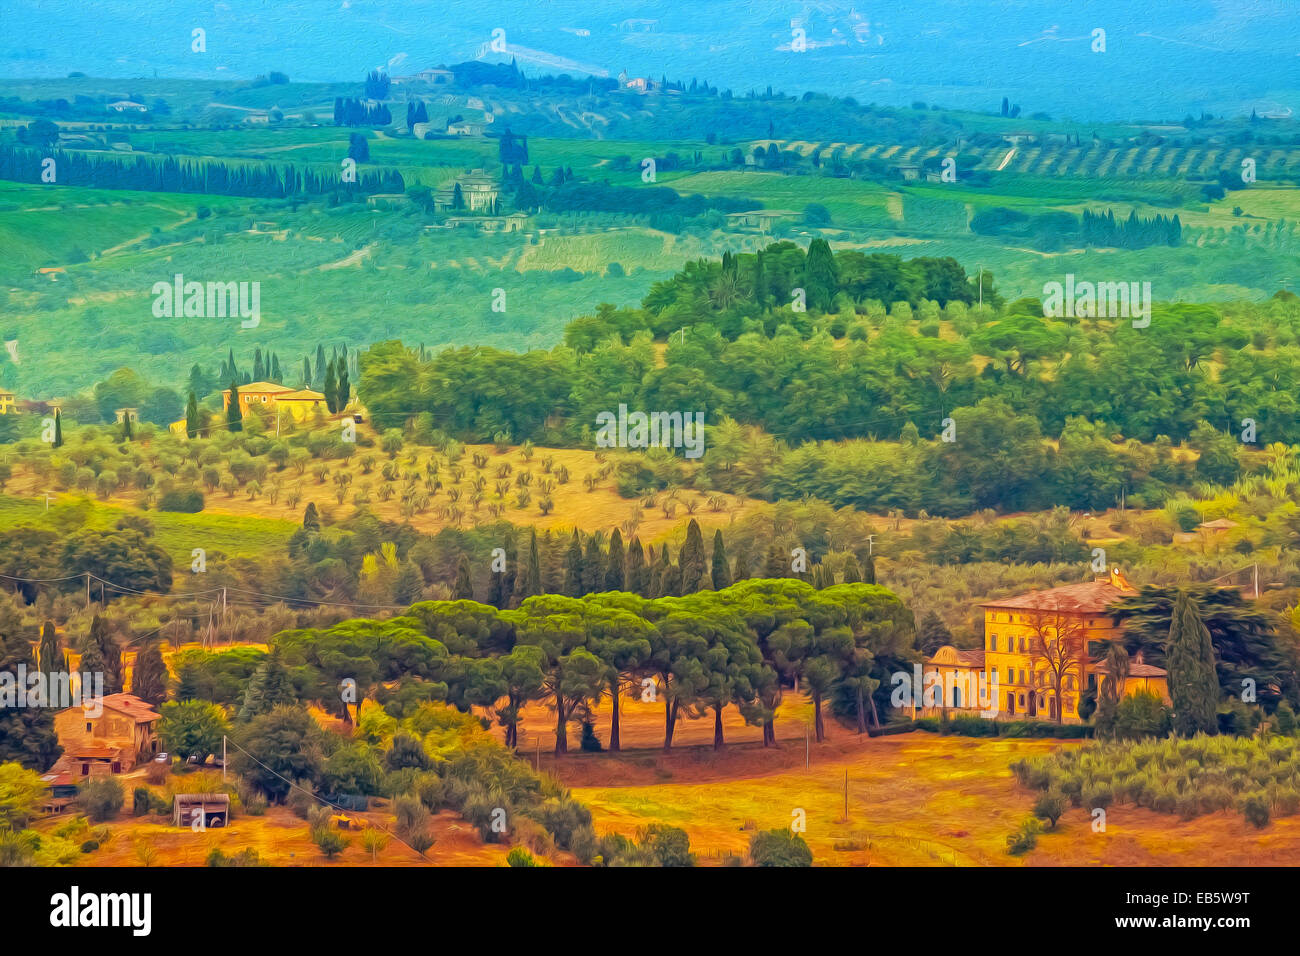 Oil painting filtered picture of Tuscany landscape, Italy. Stock Photo